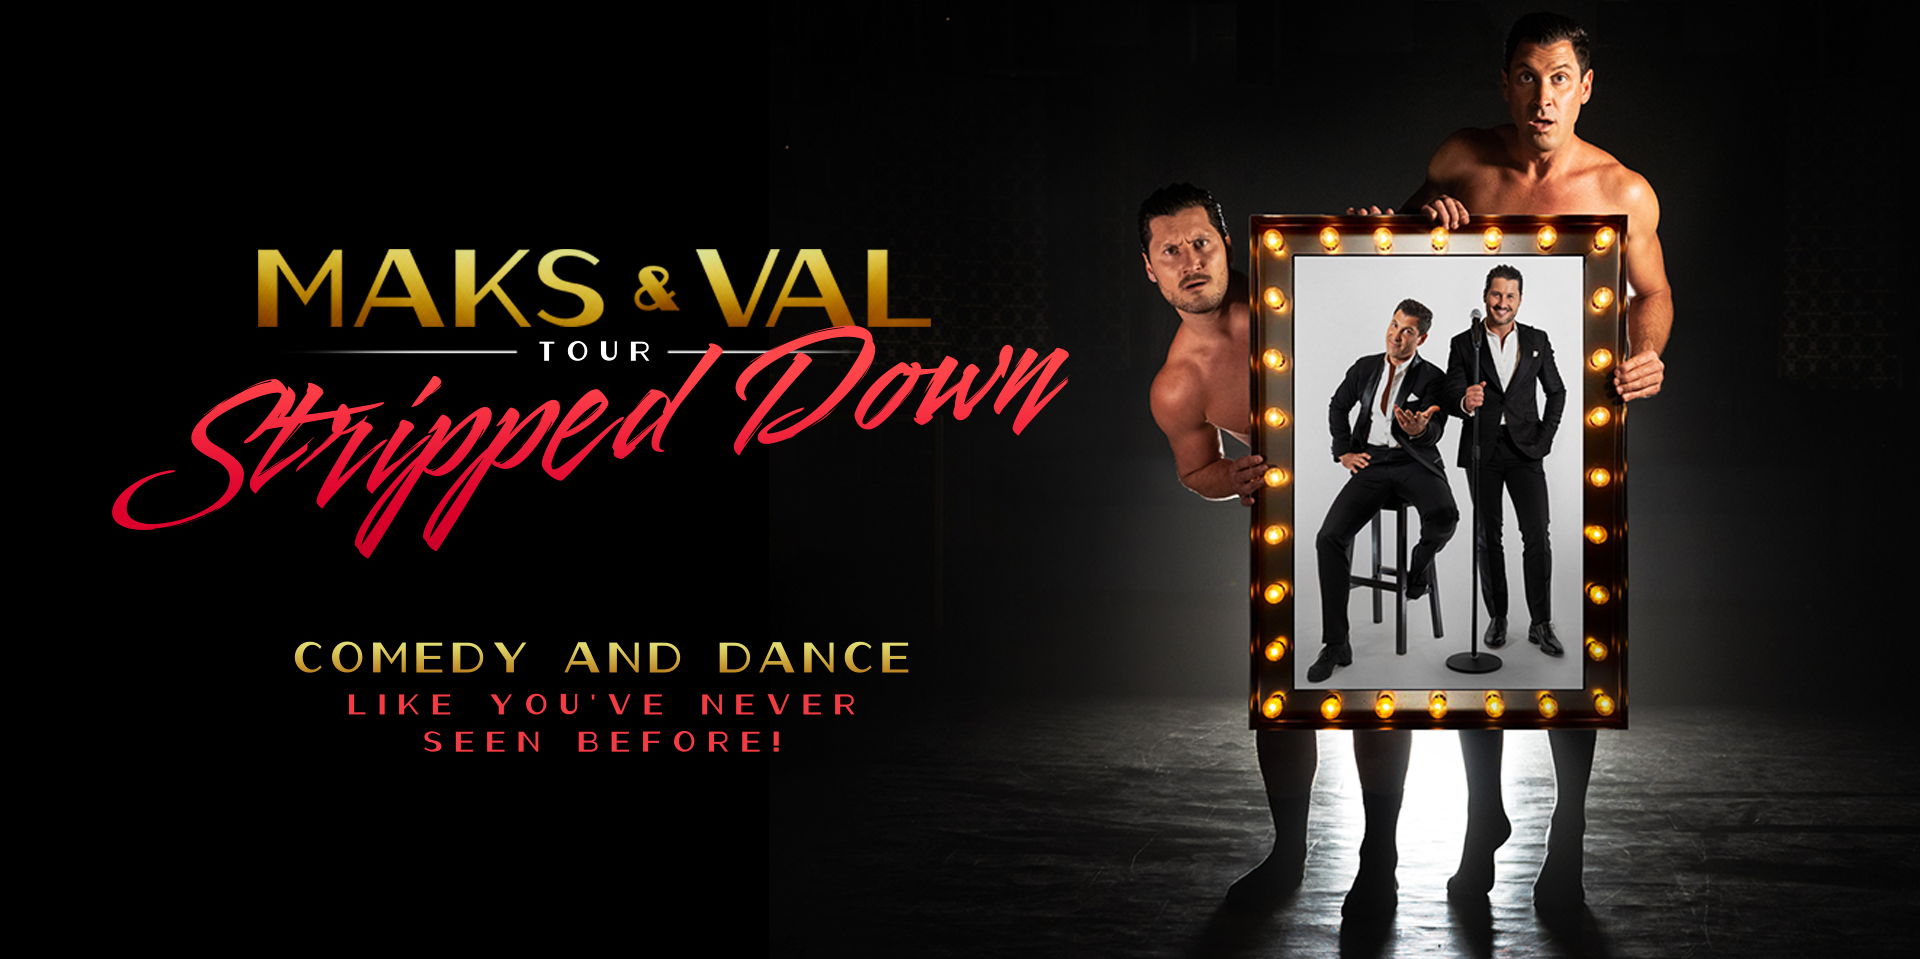 Maks & Val: Stripped Down promotional image